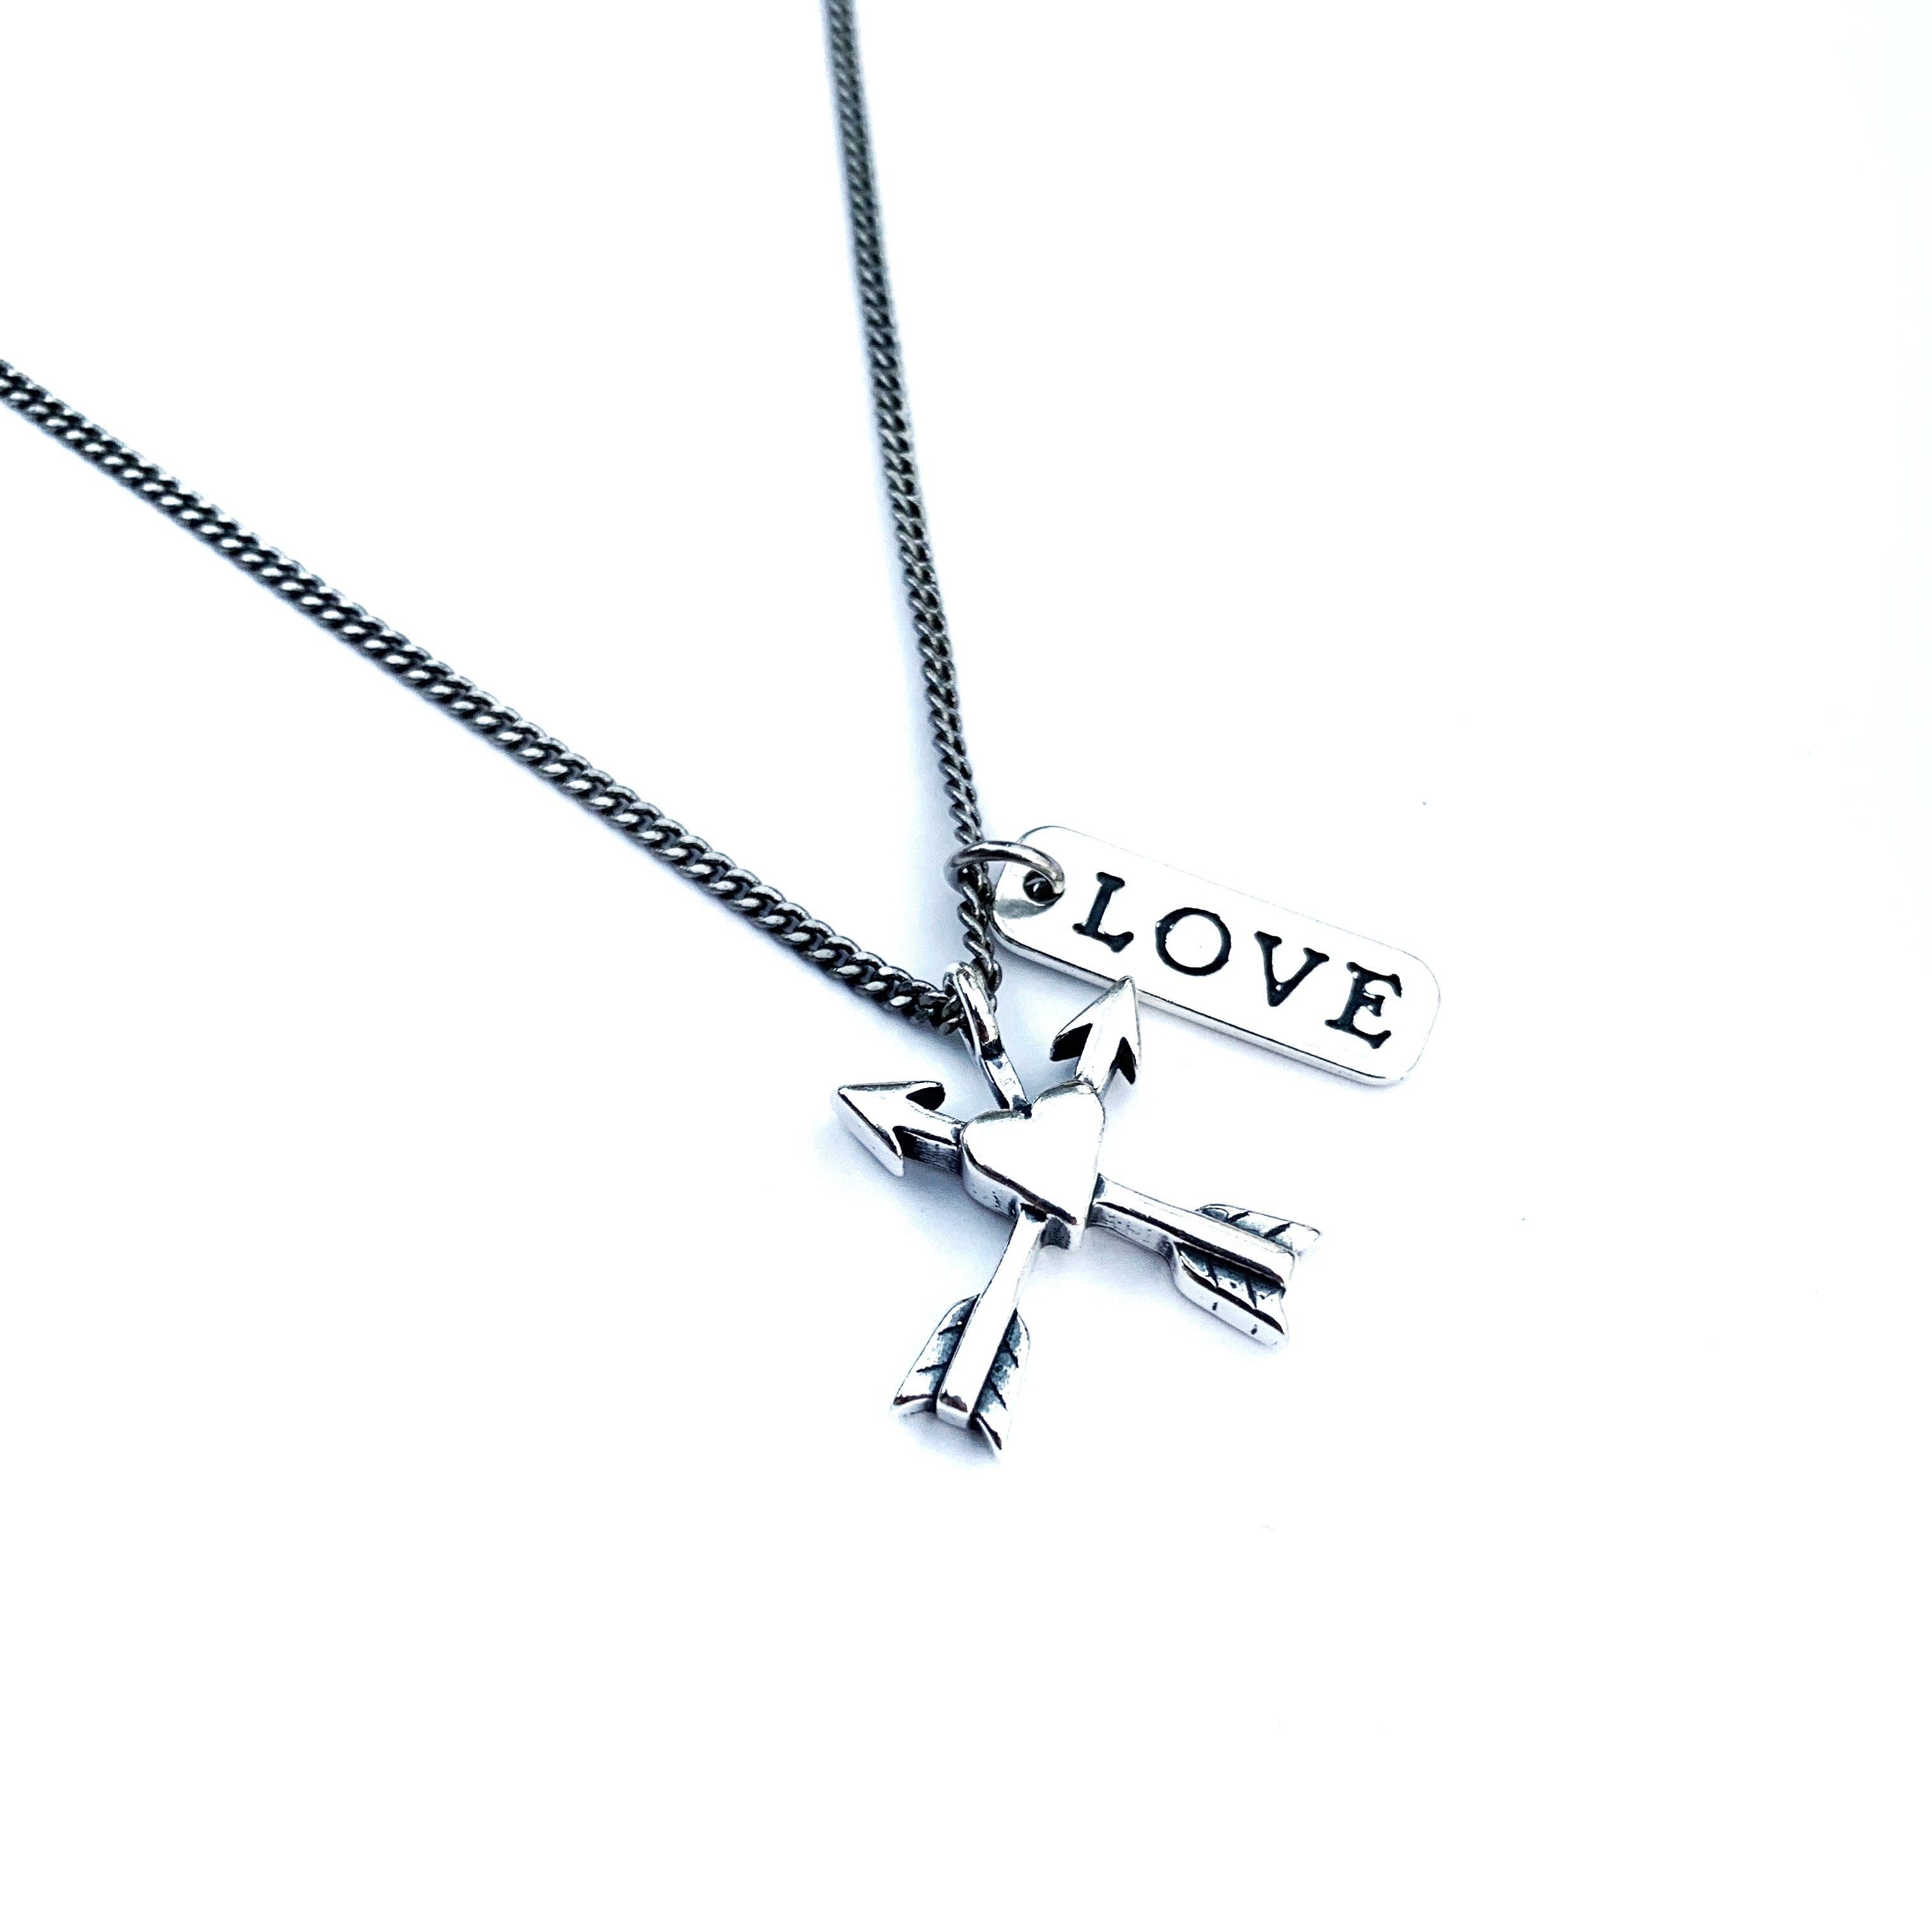 Friends Forever Arrows Necklace - Sterling Silver Choker Mini